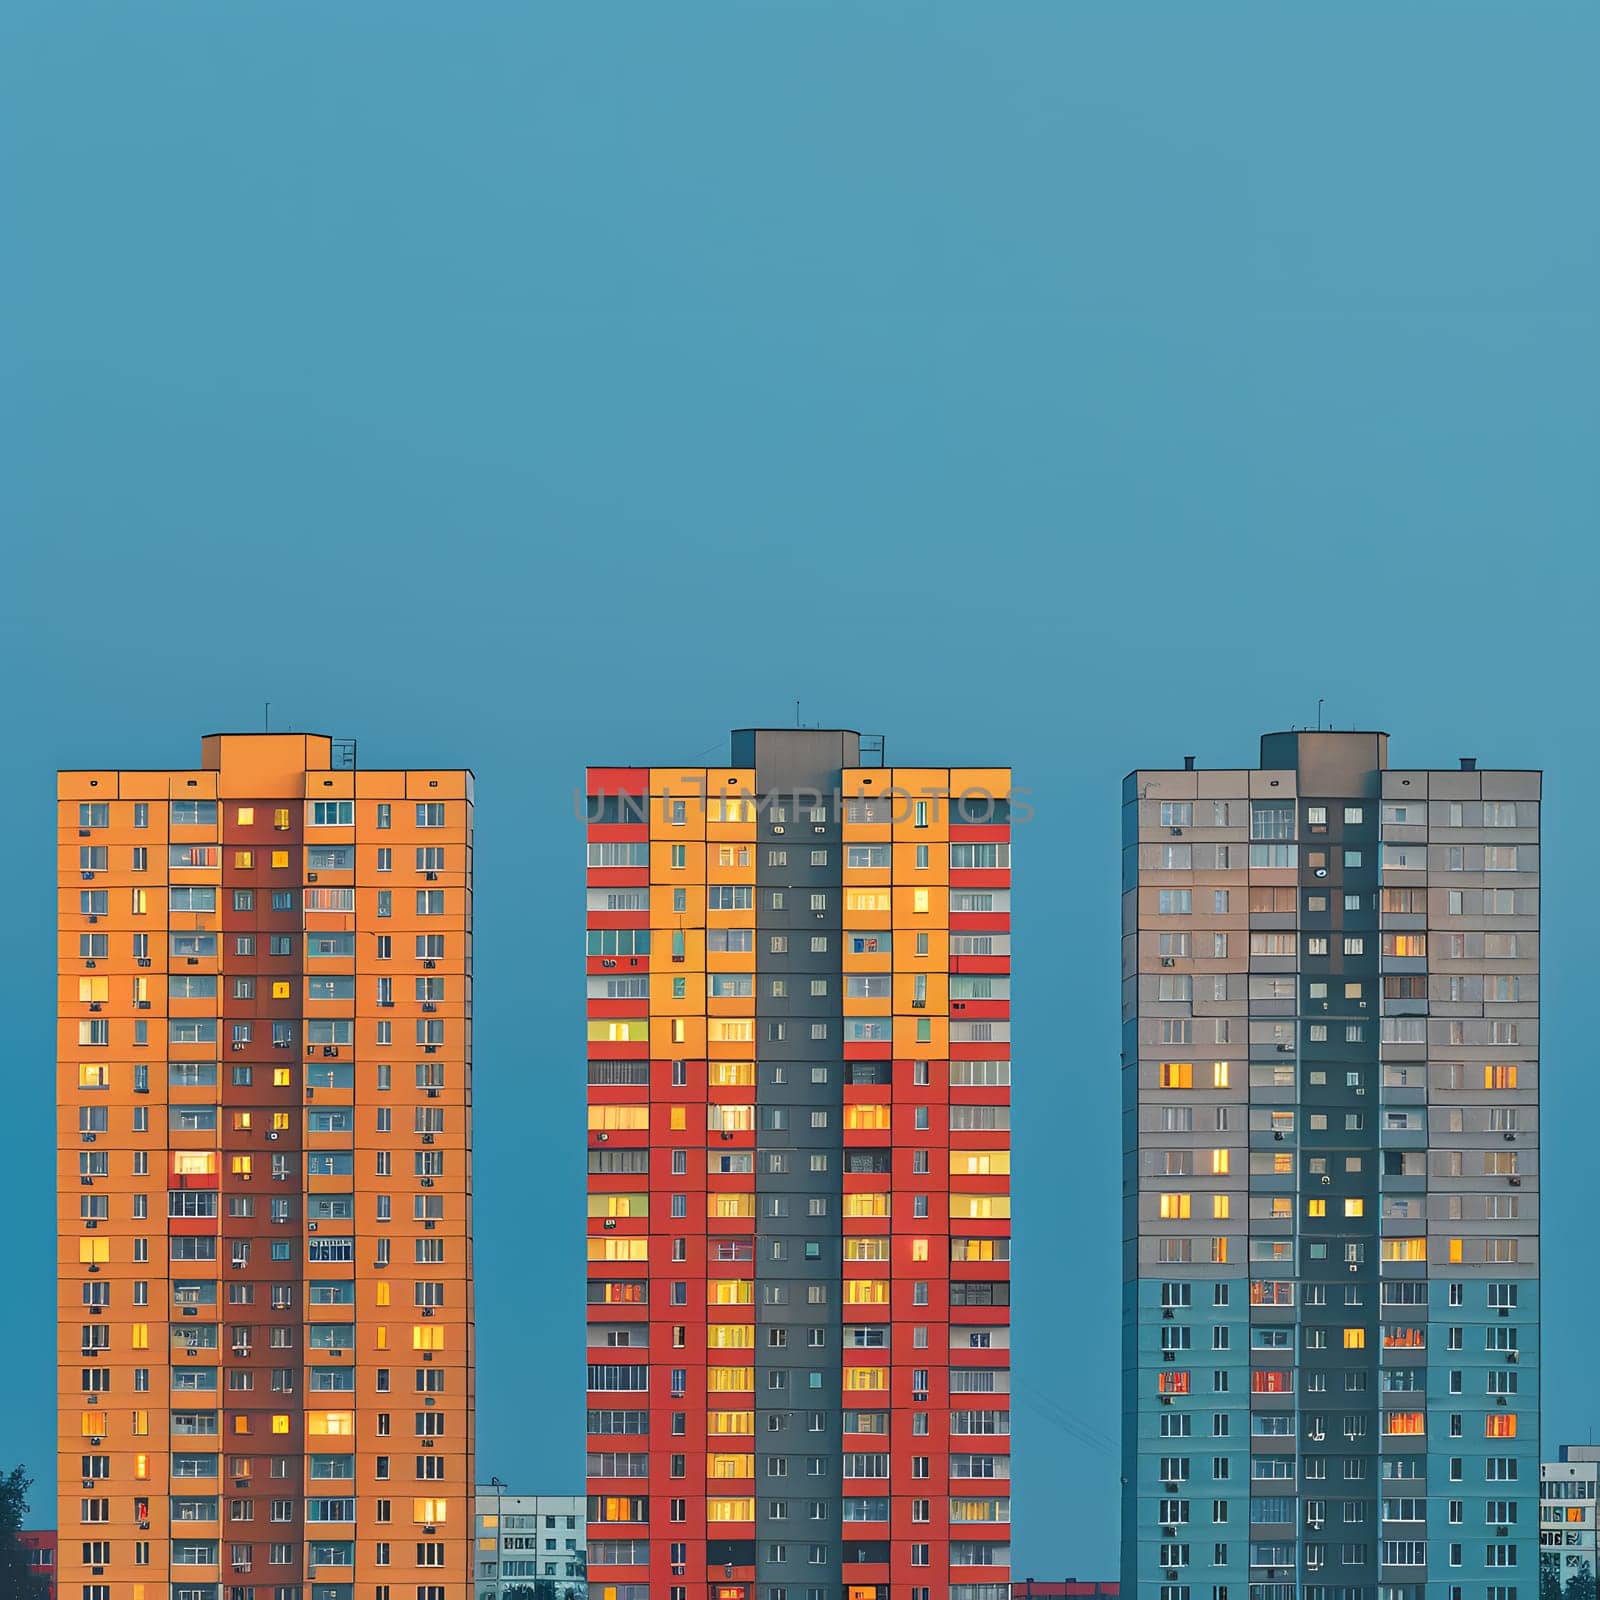 Three skyscraper tower blocks with rectangular shapes are aligned against a clear blue sky, showcasing modern urban design in a condominium setting